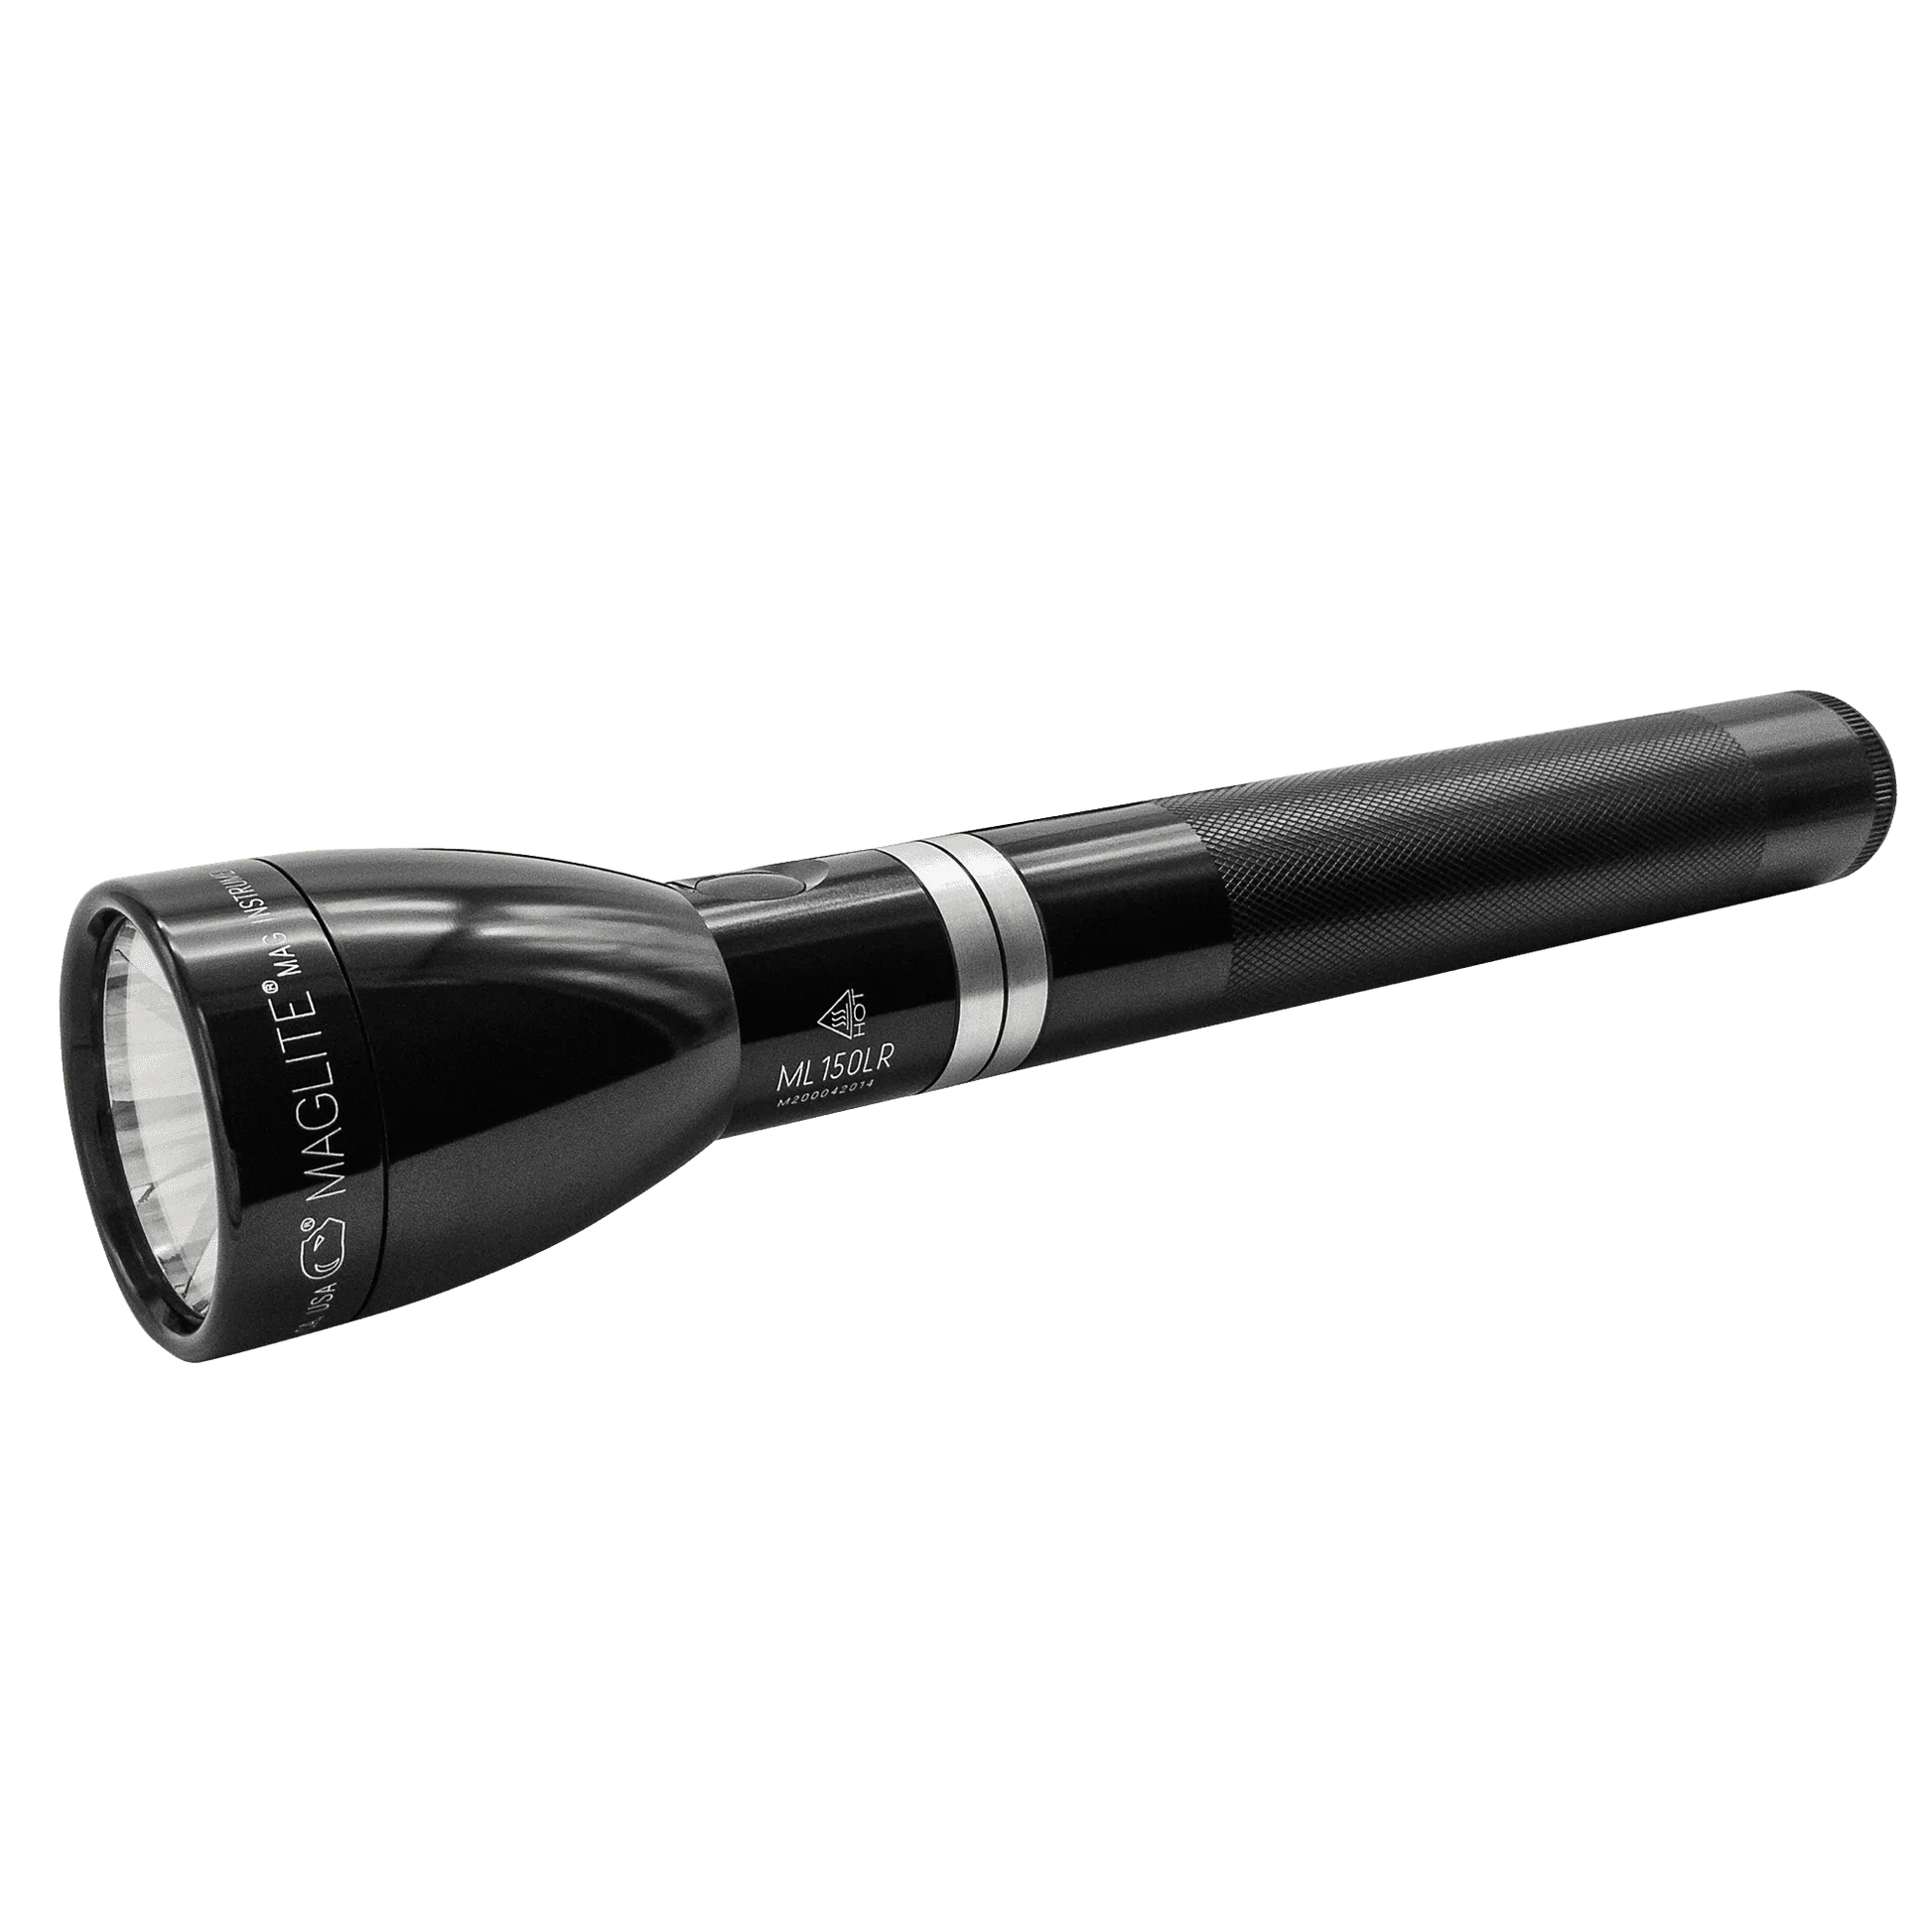 Maglite MAG-TAC LED Rechargeable Flashlight System Crowned Bezel – JR/DG  TOWING ACCESSORIES